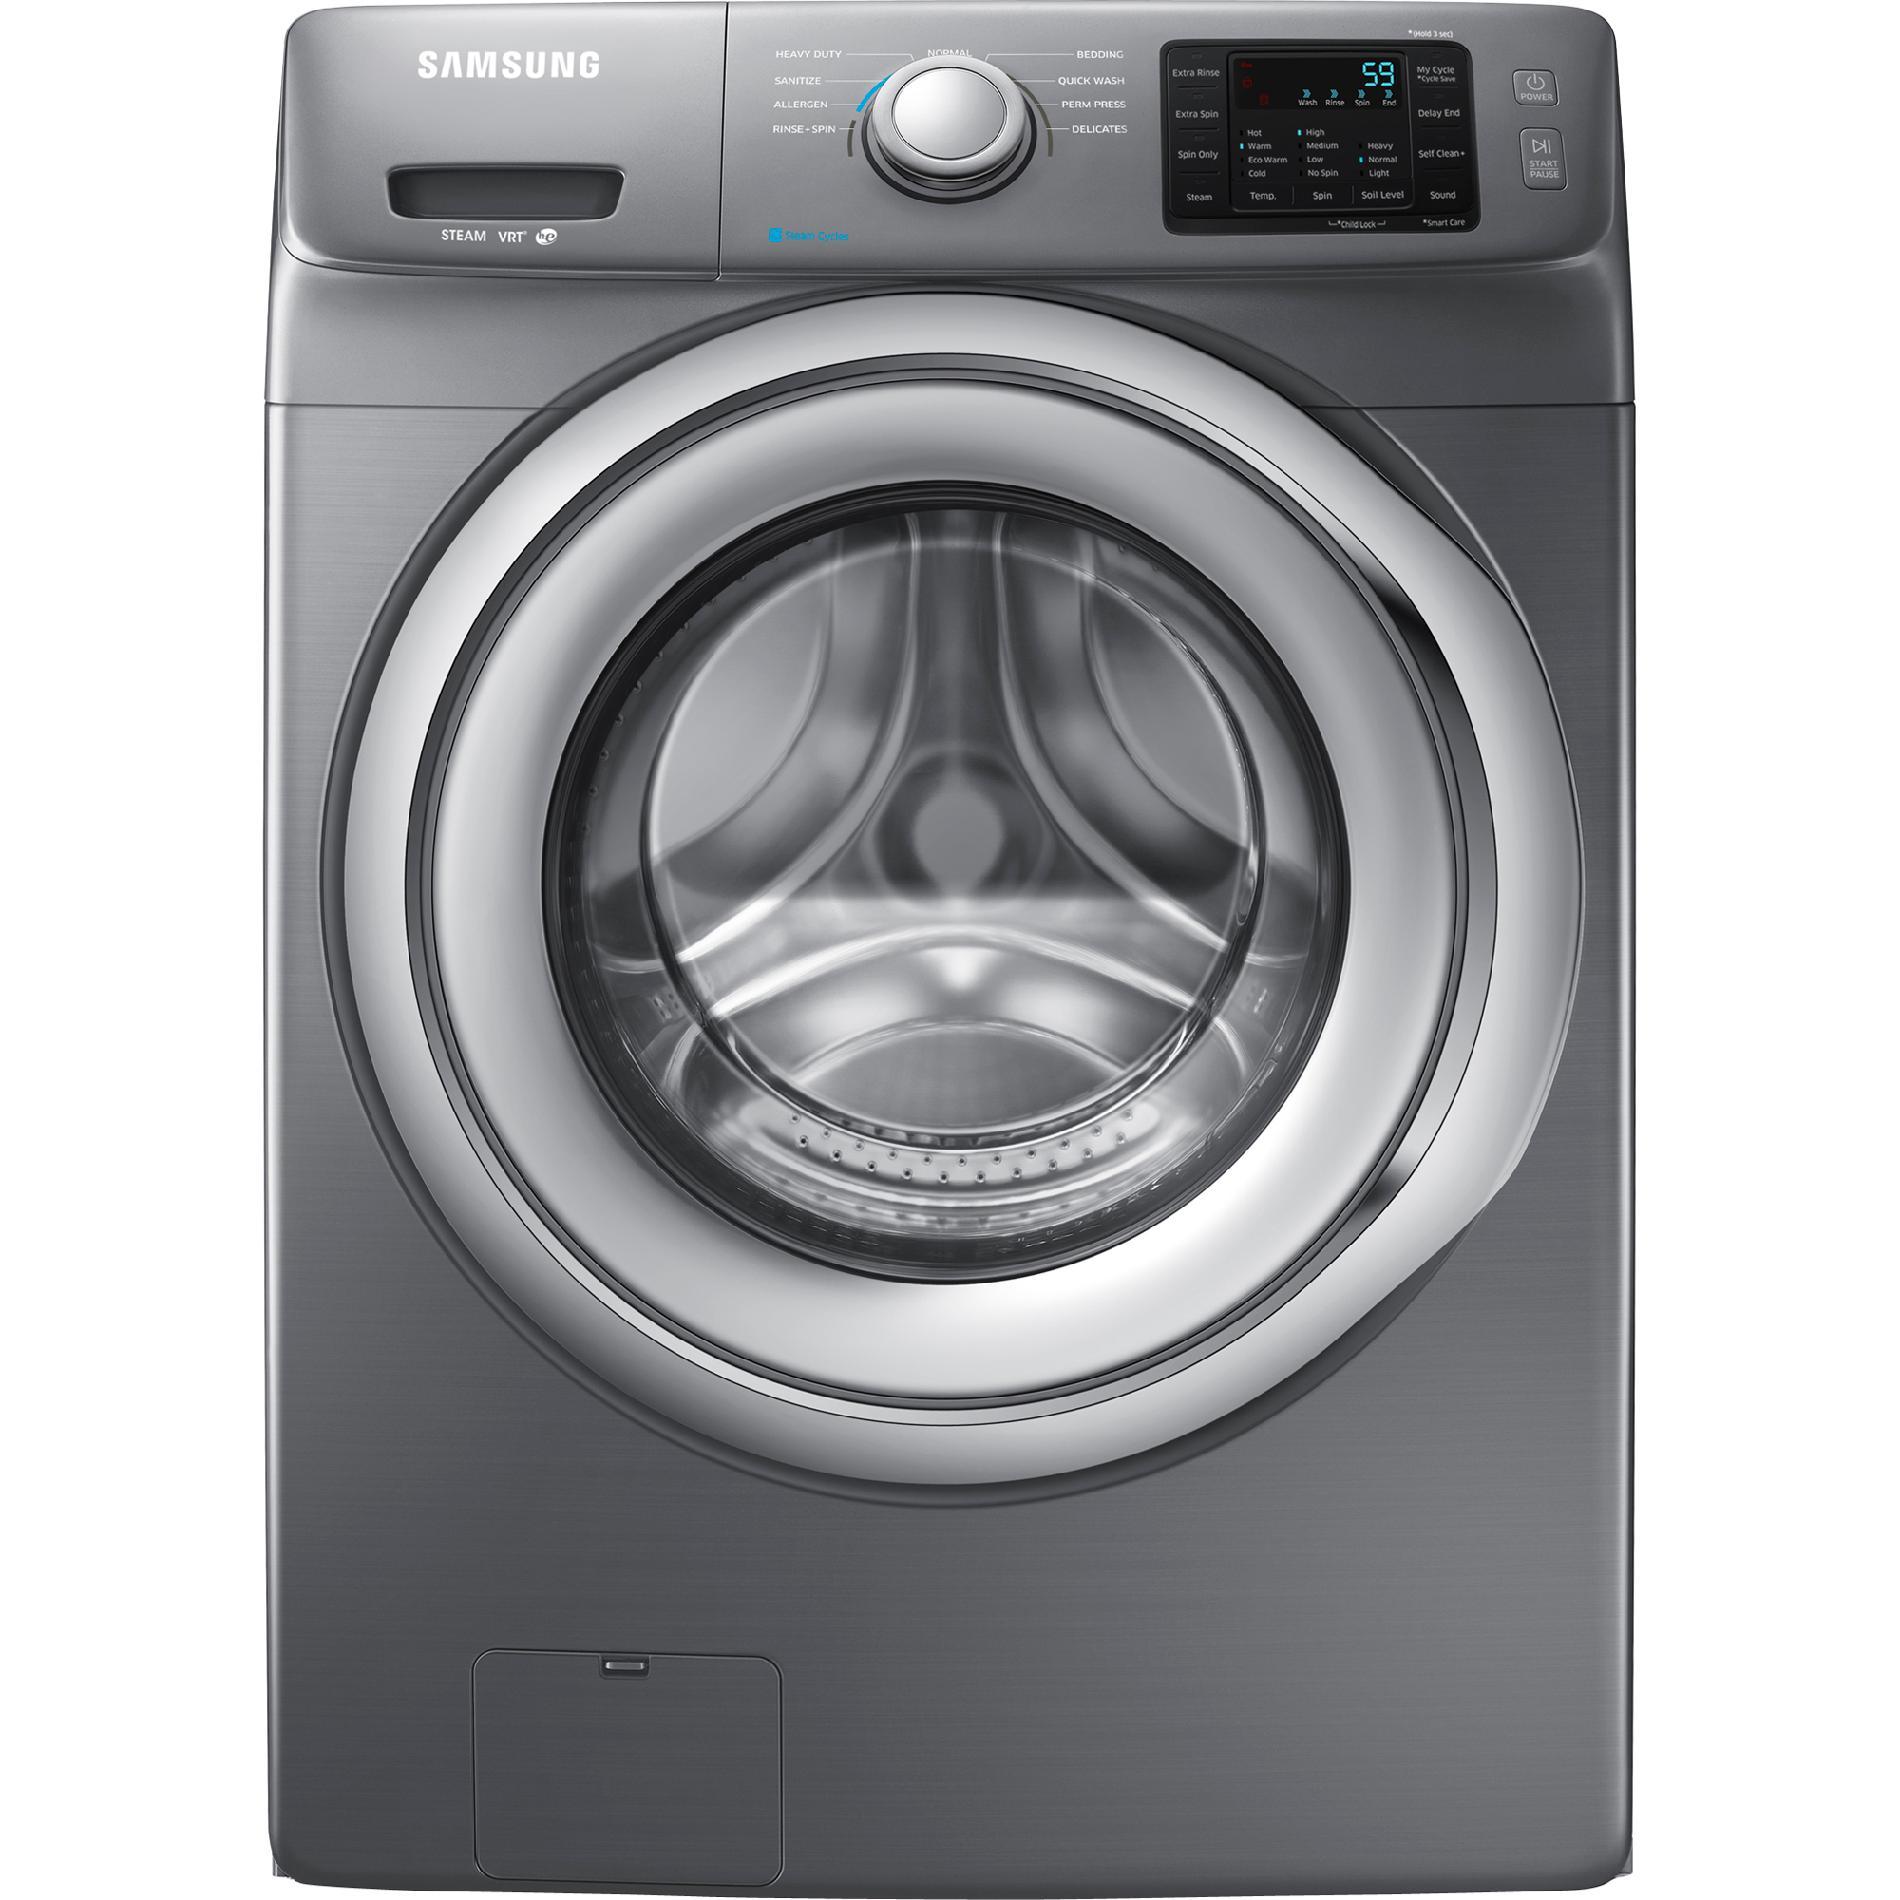 Lowes Samsung Washer And Dryer Rebate